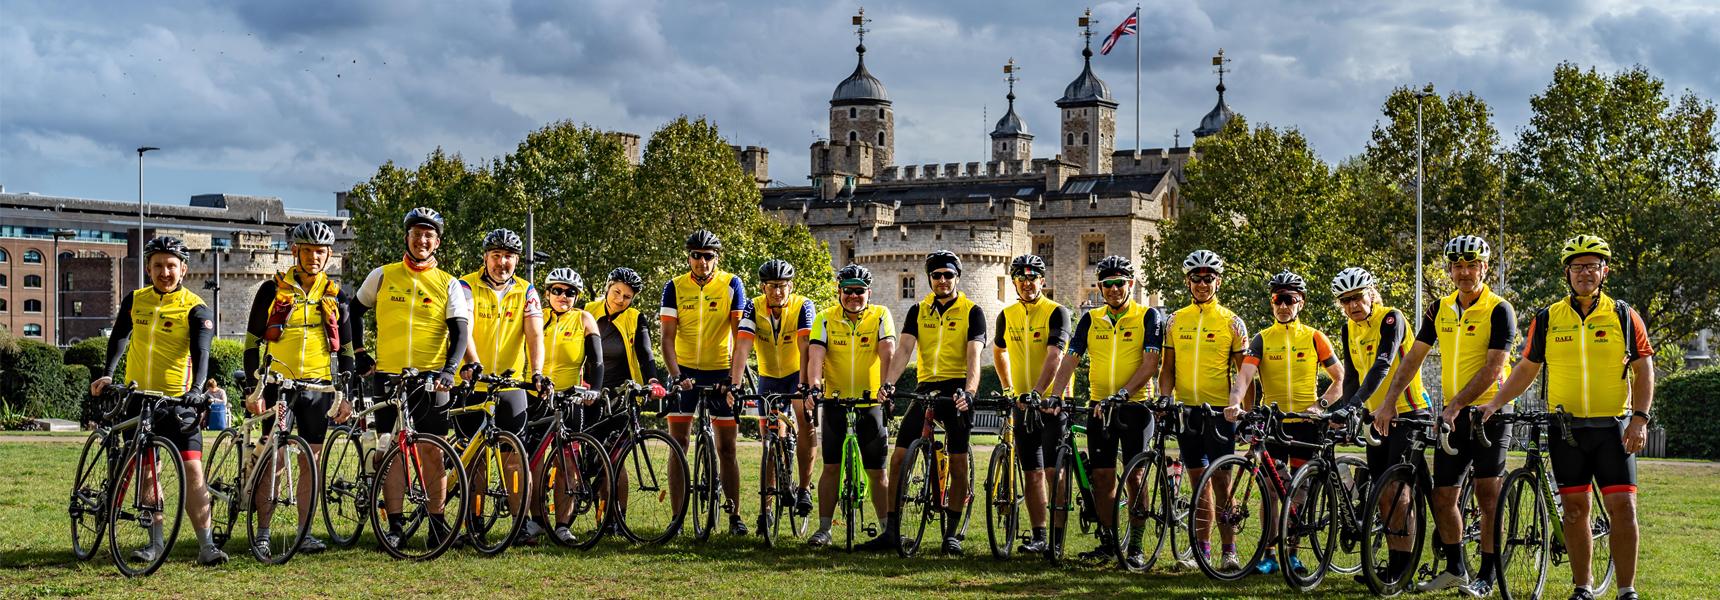 TT24 Charity Cycle from London to Paris